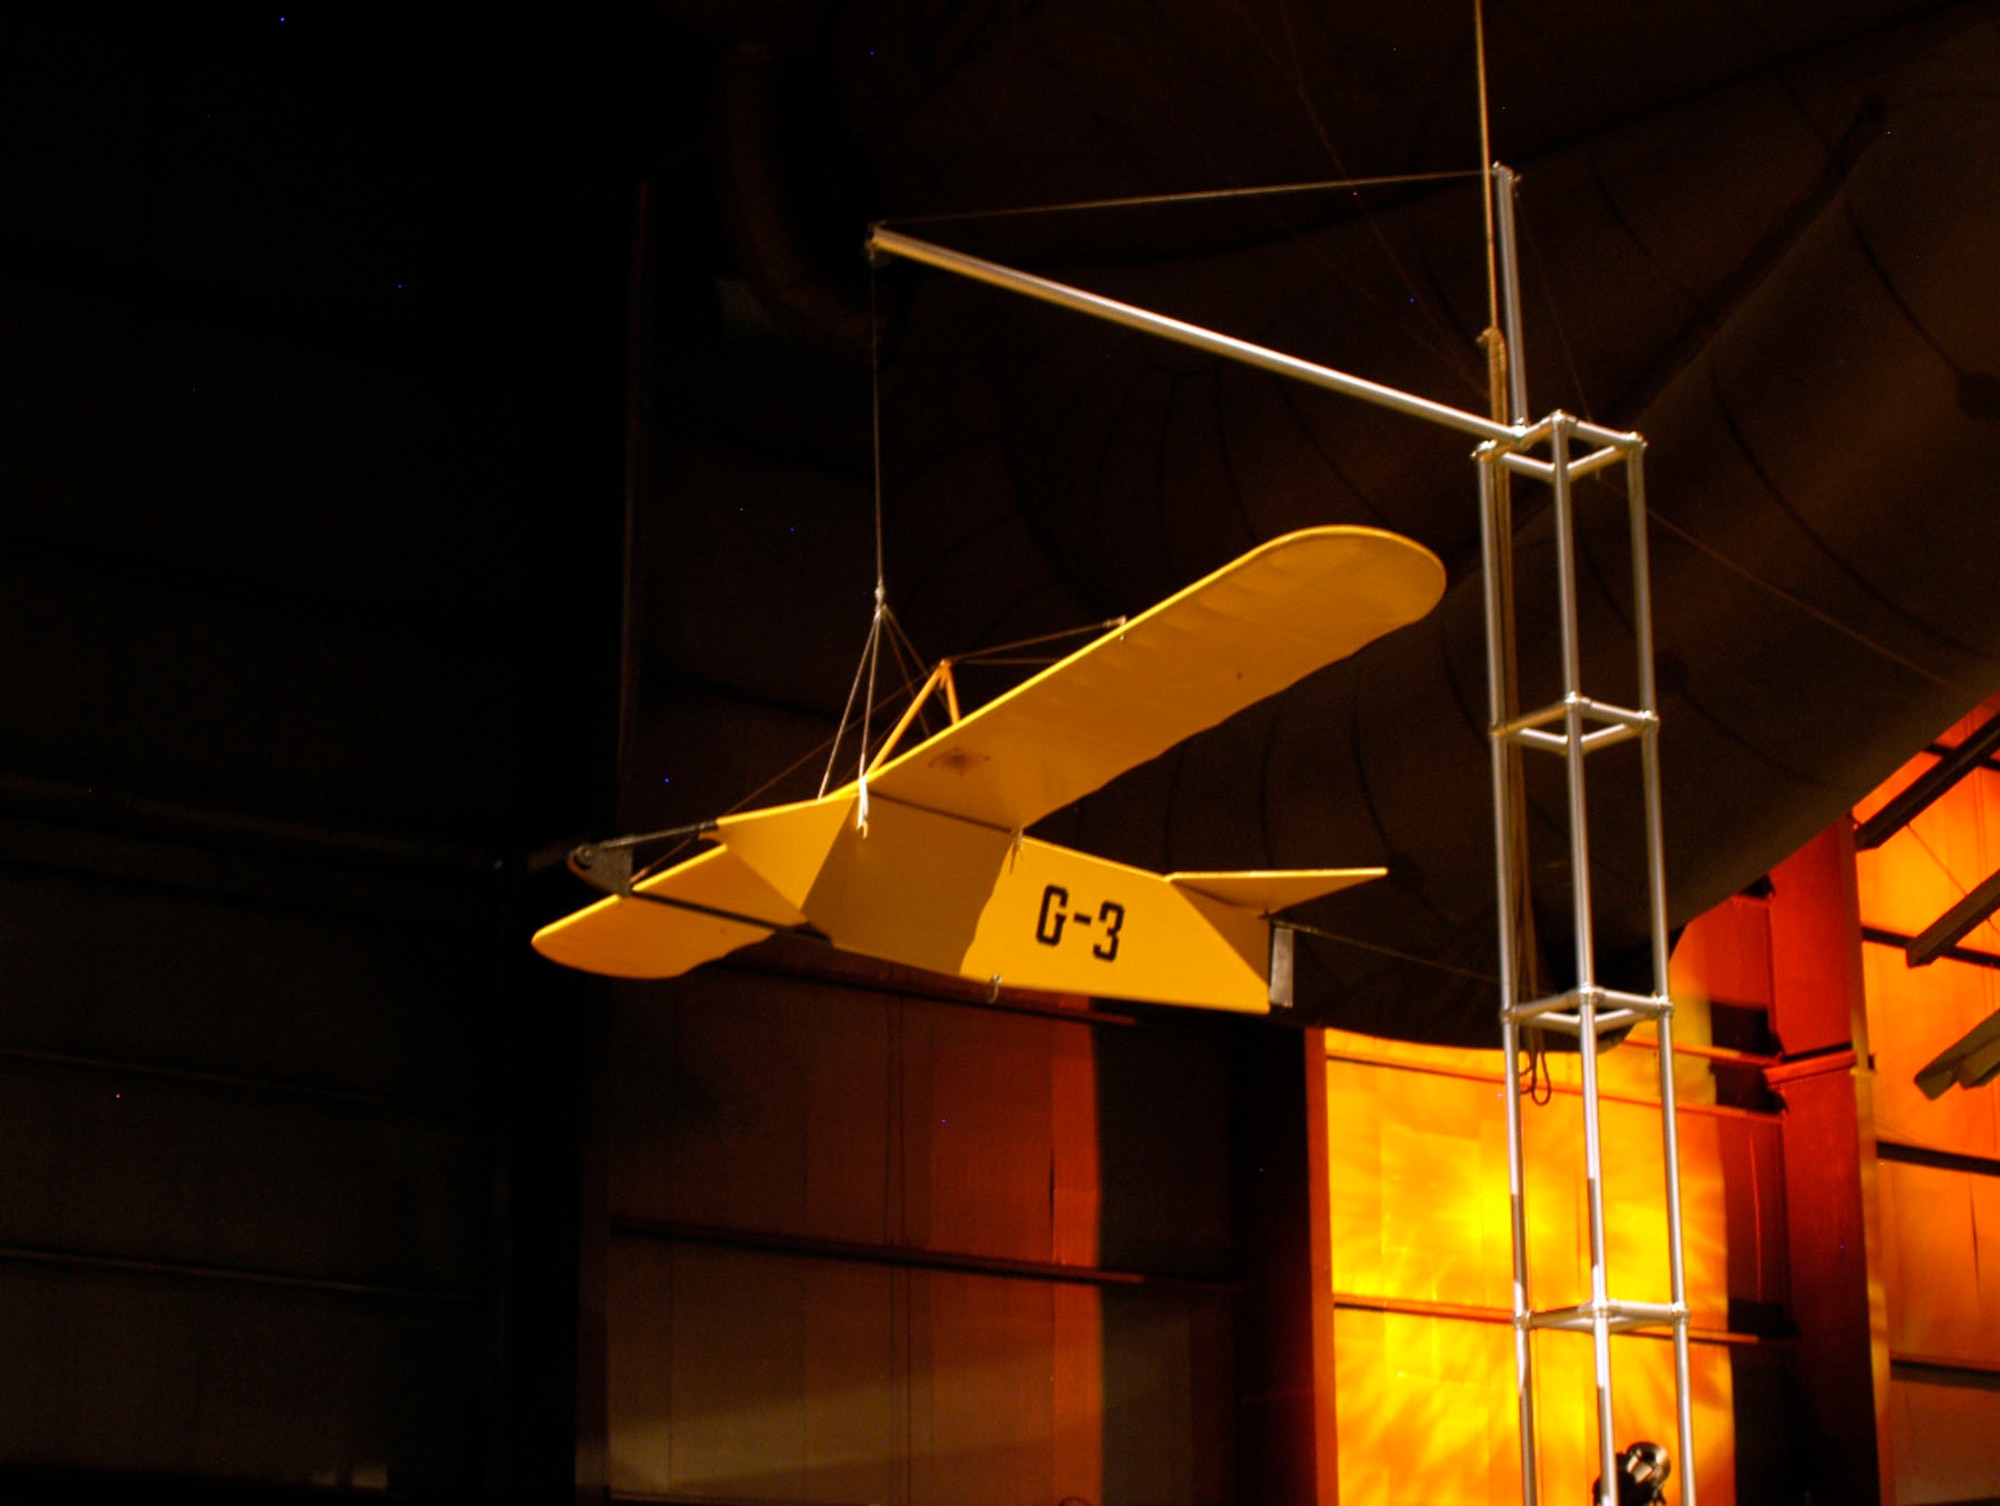 DAYTON, Ohio -- The G-3 target glider in the Early Years Gallery at the National Museum of the United States Air Force. (U.S. Air Force photo)